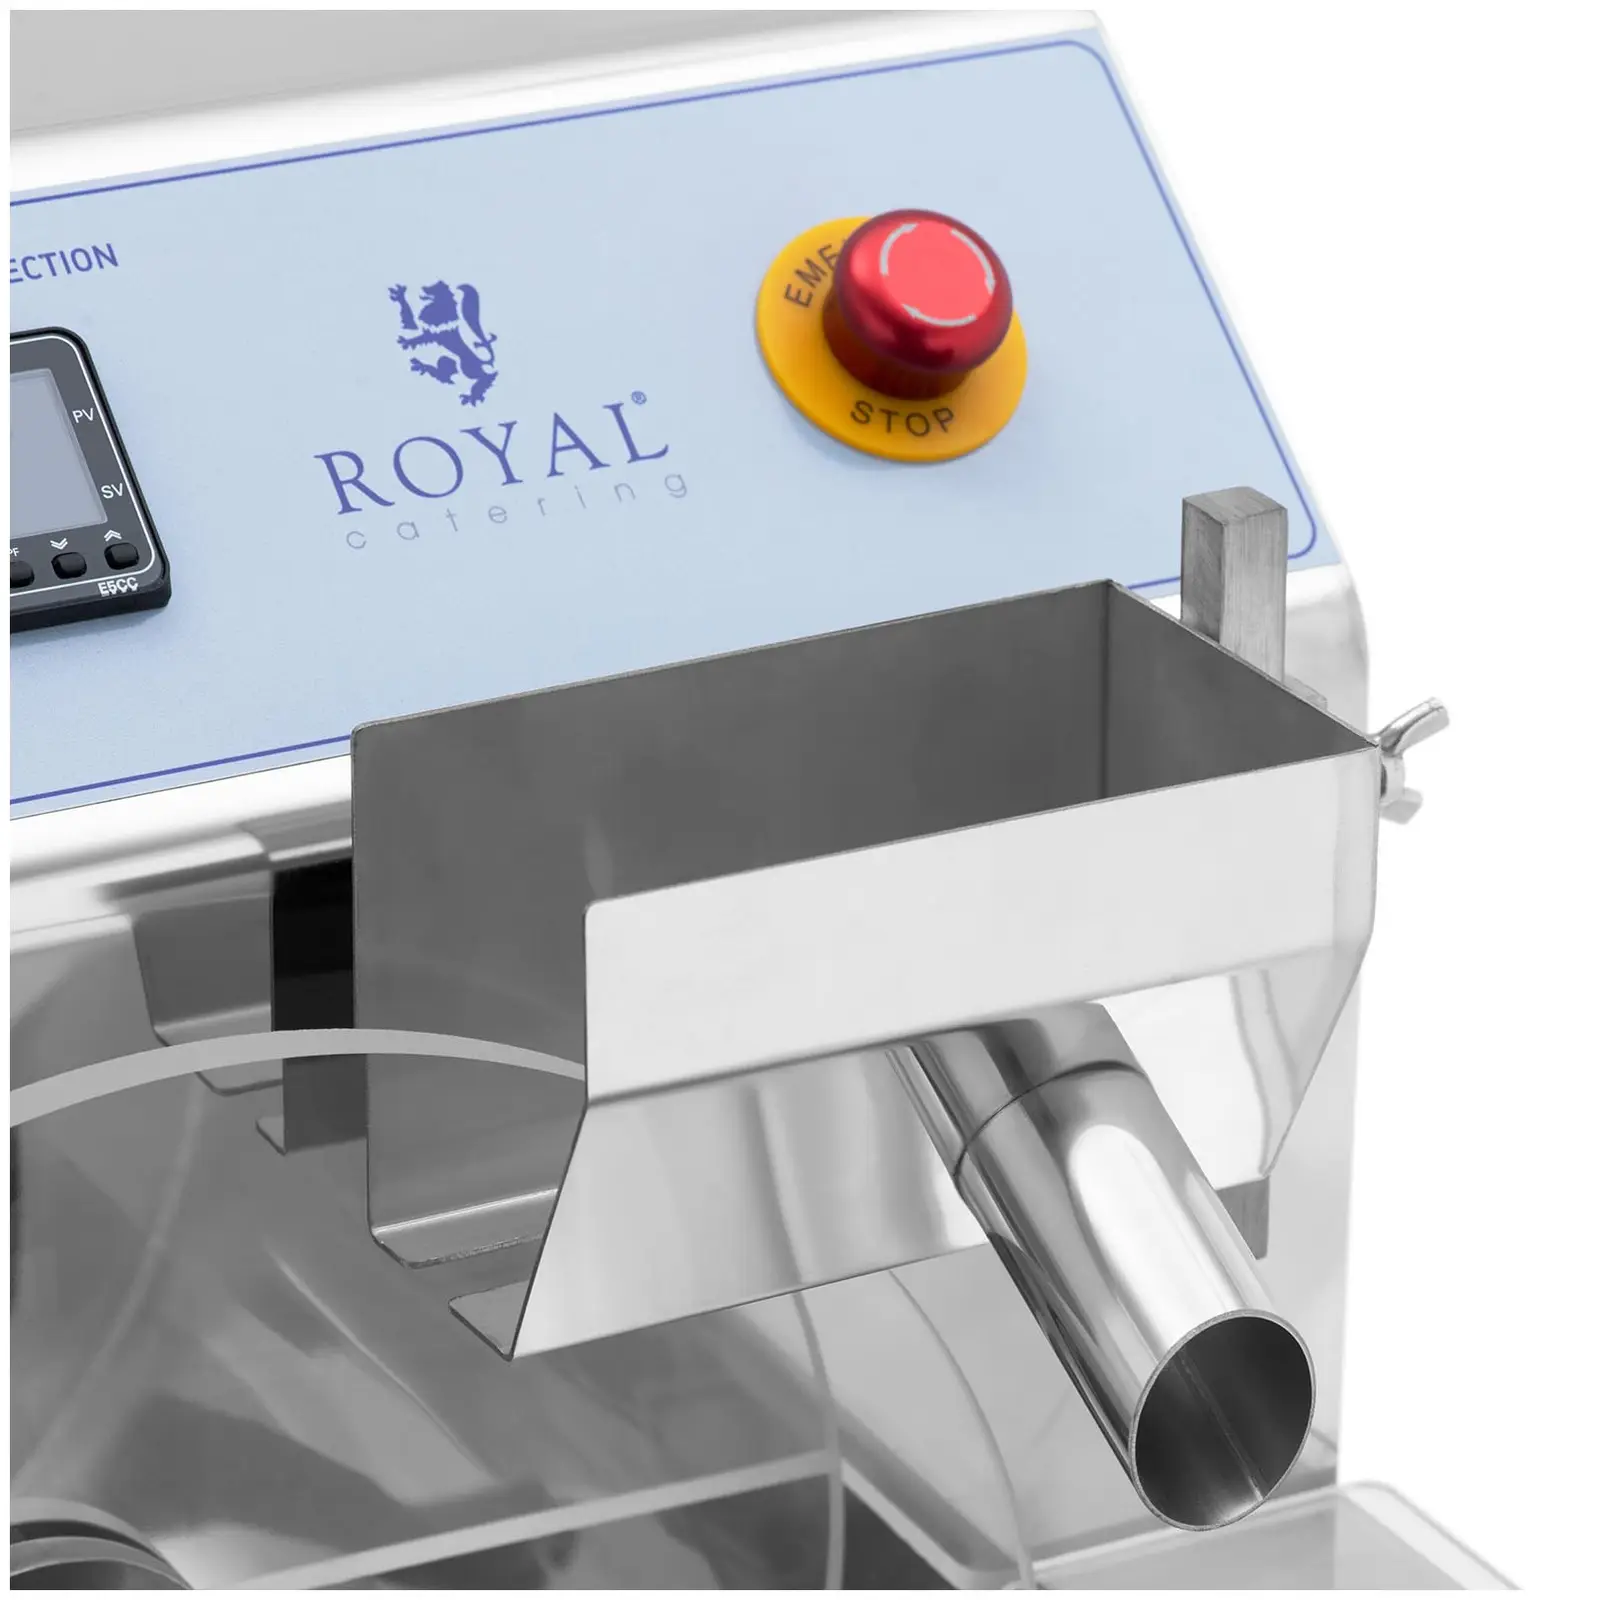 Chocoladetempereerapparaat - RVS - 1200 W - 8 l - Royal Catering